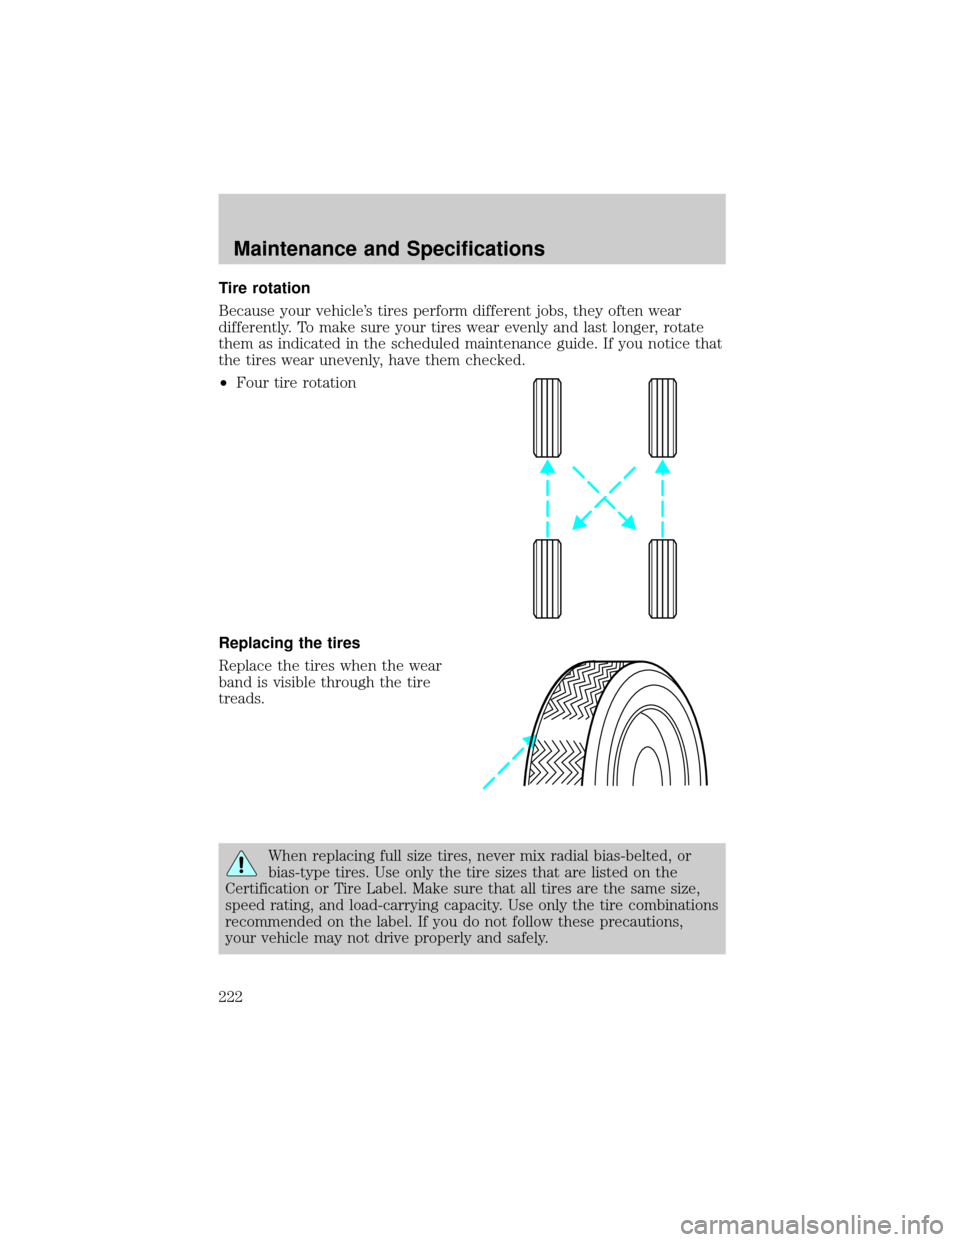 LINCOLN CONTINENTAL 2002  Owners Manual Tire rotation
Because your vehicles tires perform different jobs, they often wear
differently. To make sure your tires wear evenly and last longer, rotate
them as indicated in the scheduled maintenan